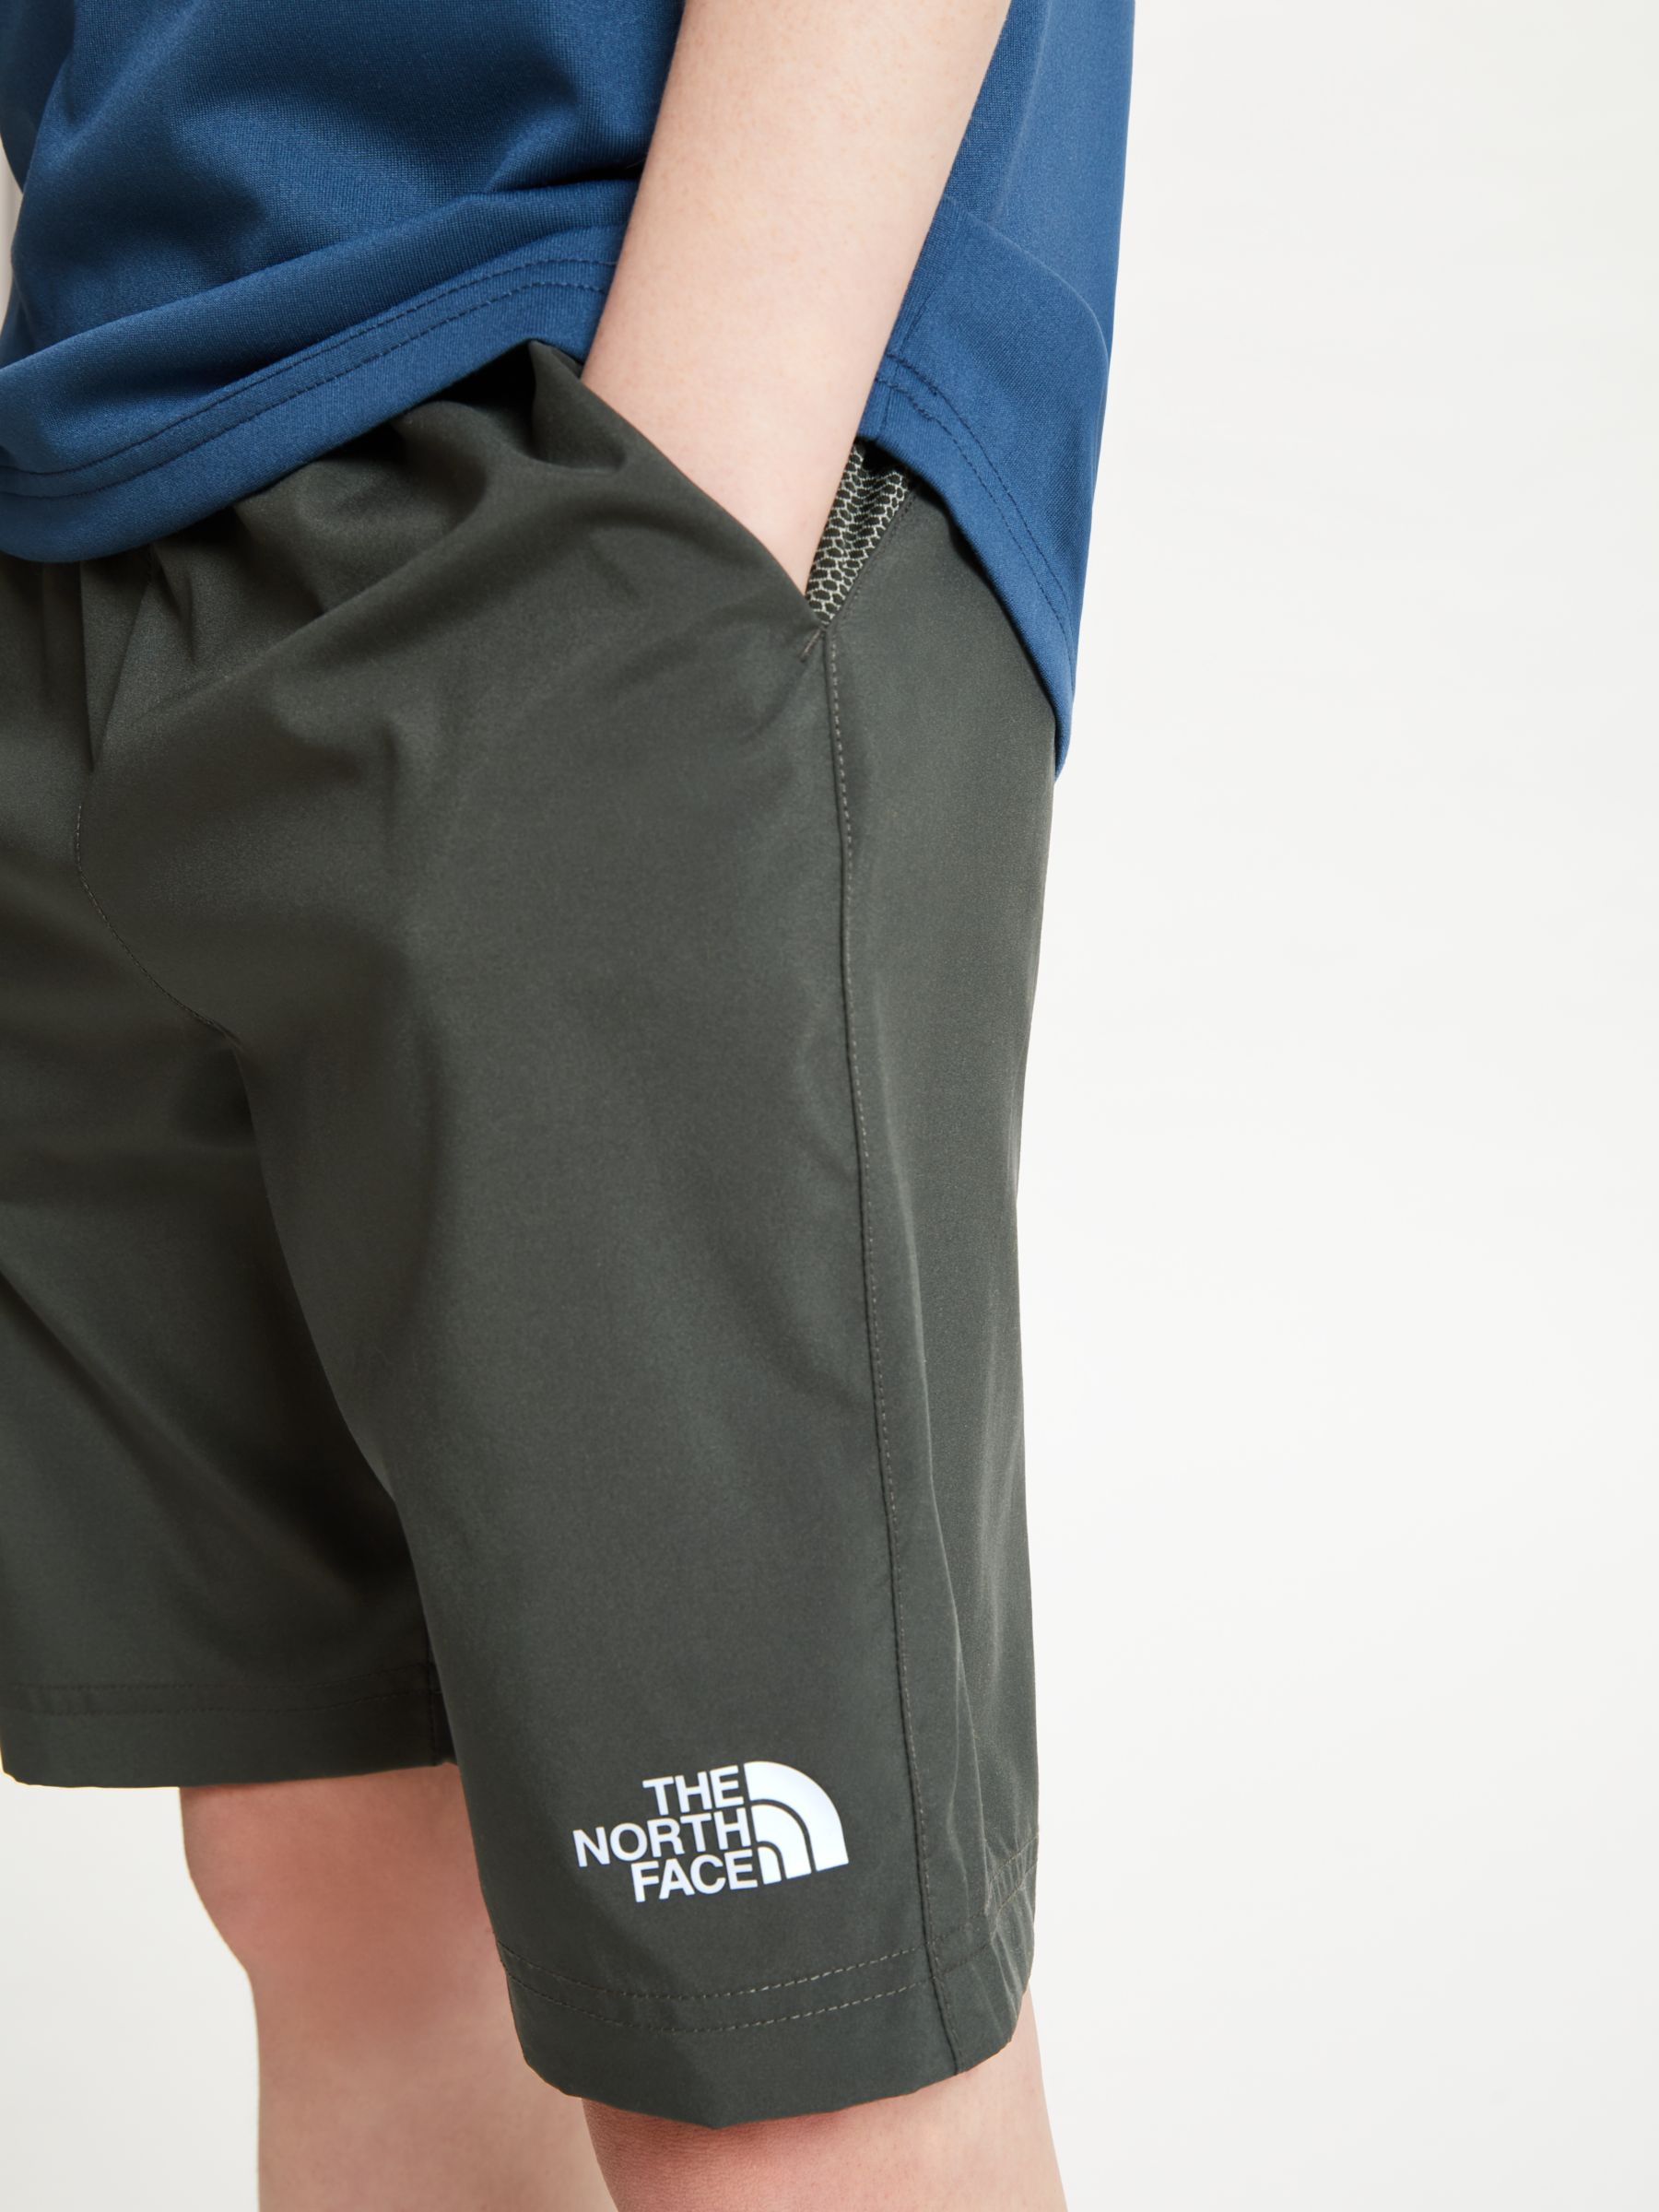 the north face men's reactor shorts